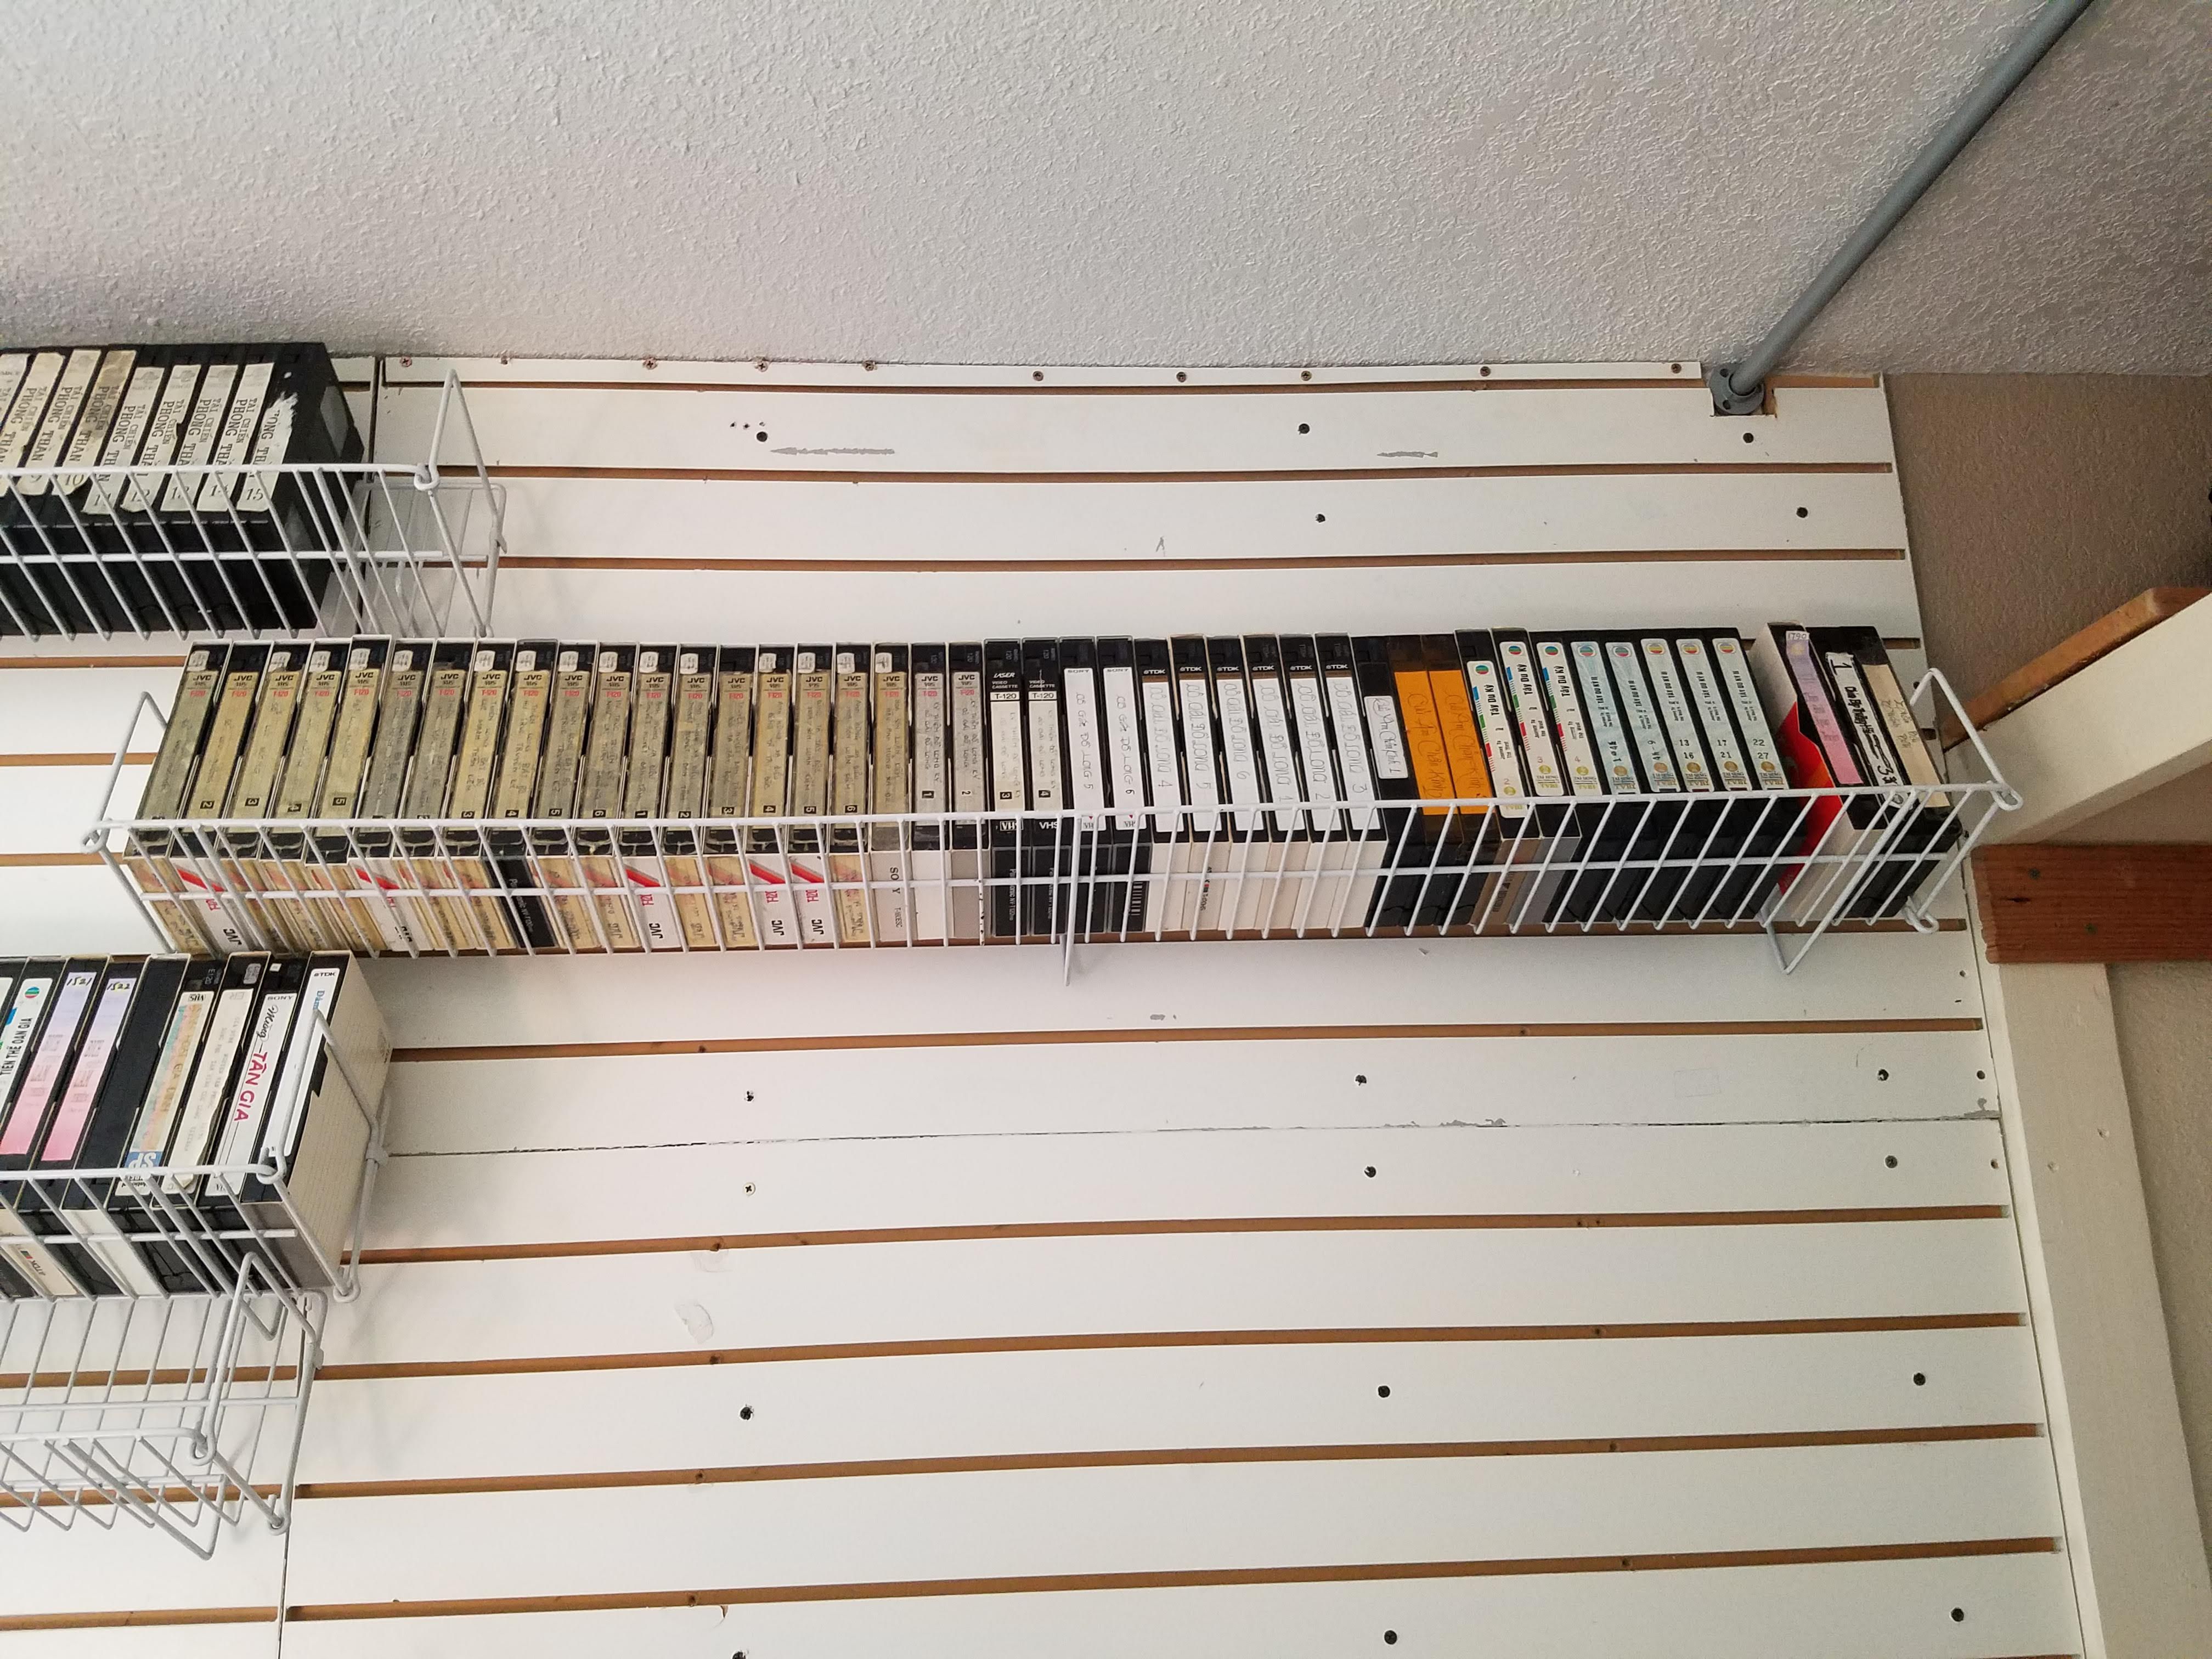 Wired metal shelves